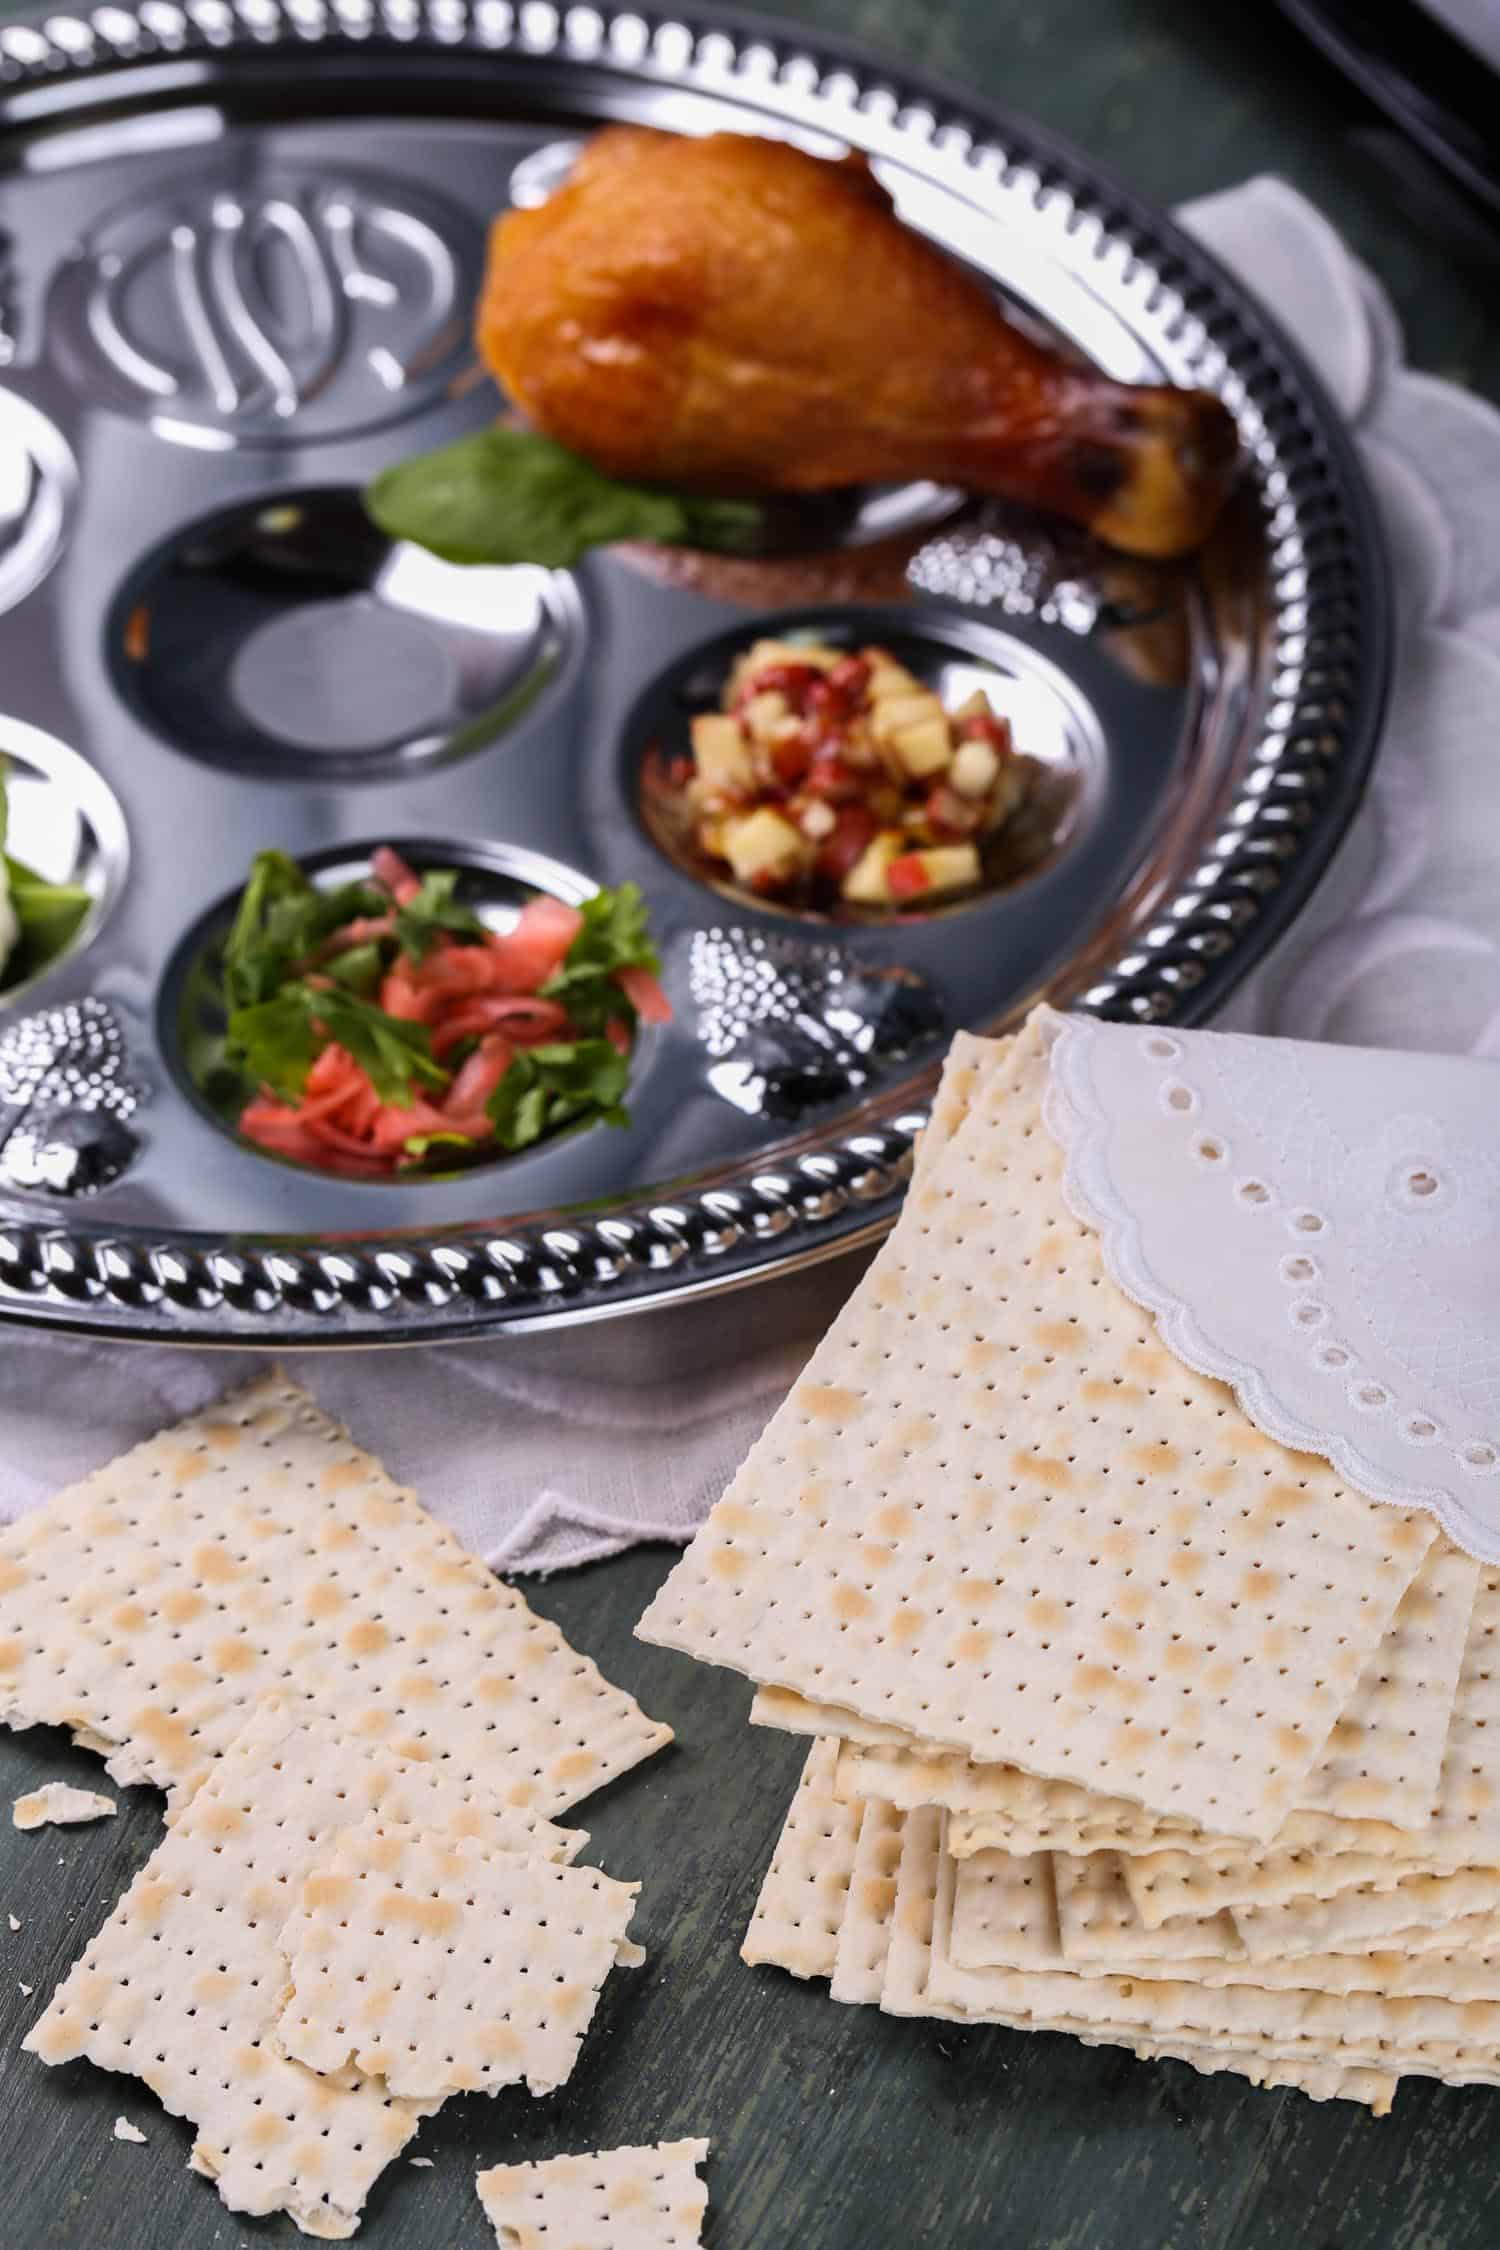 Passover seder plate with symbolic passover food and matzo cracker on the side.